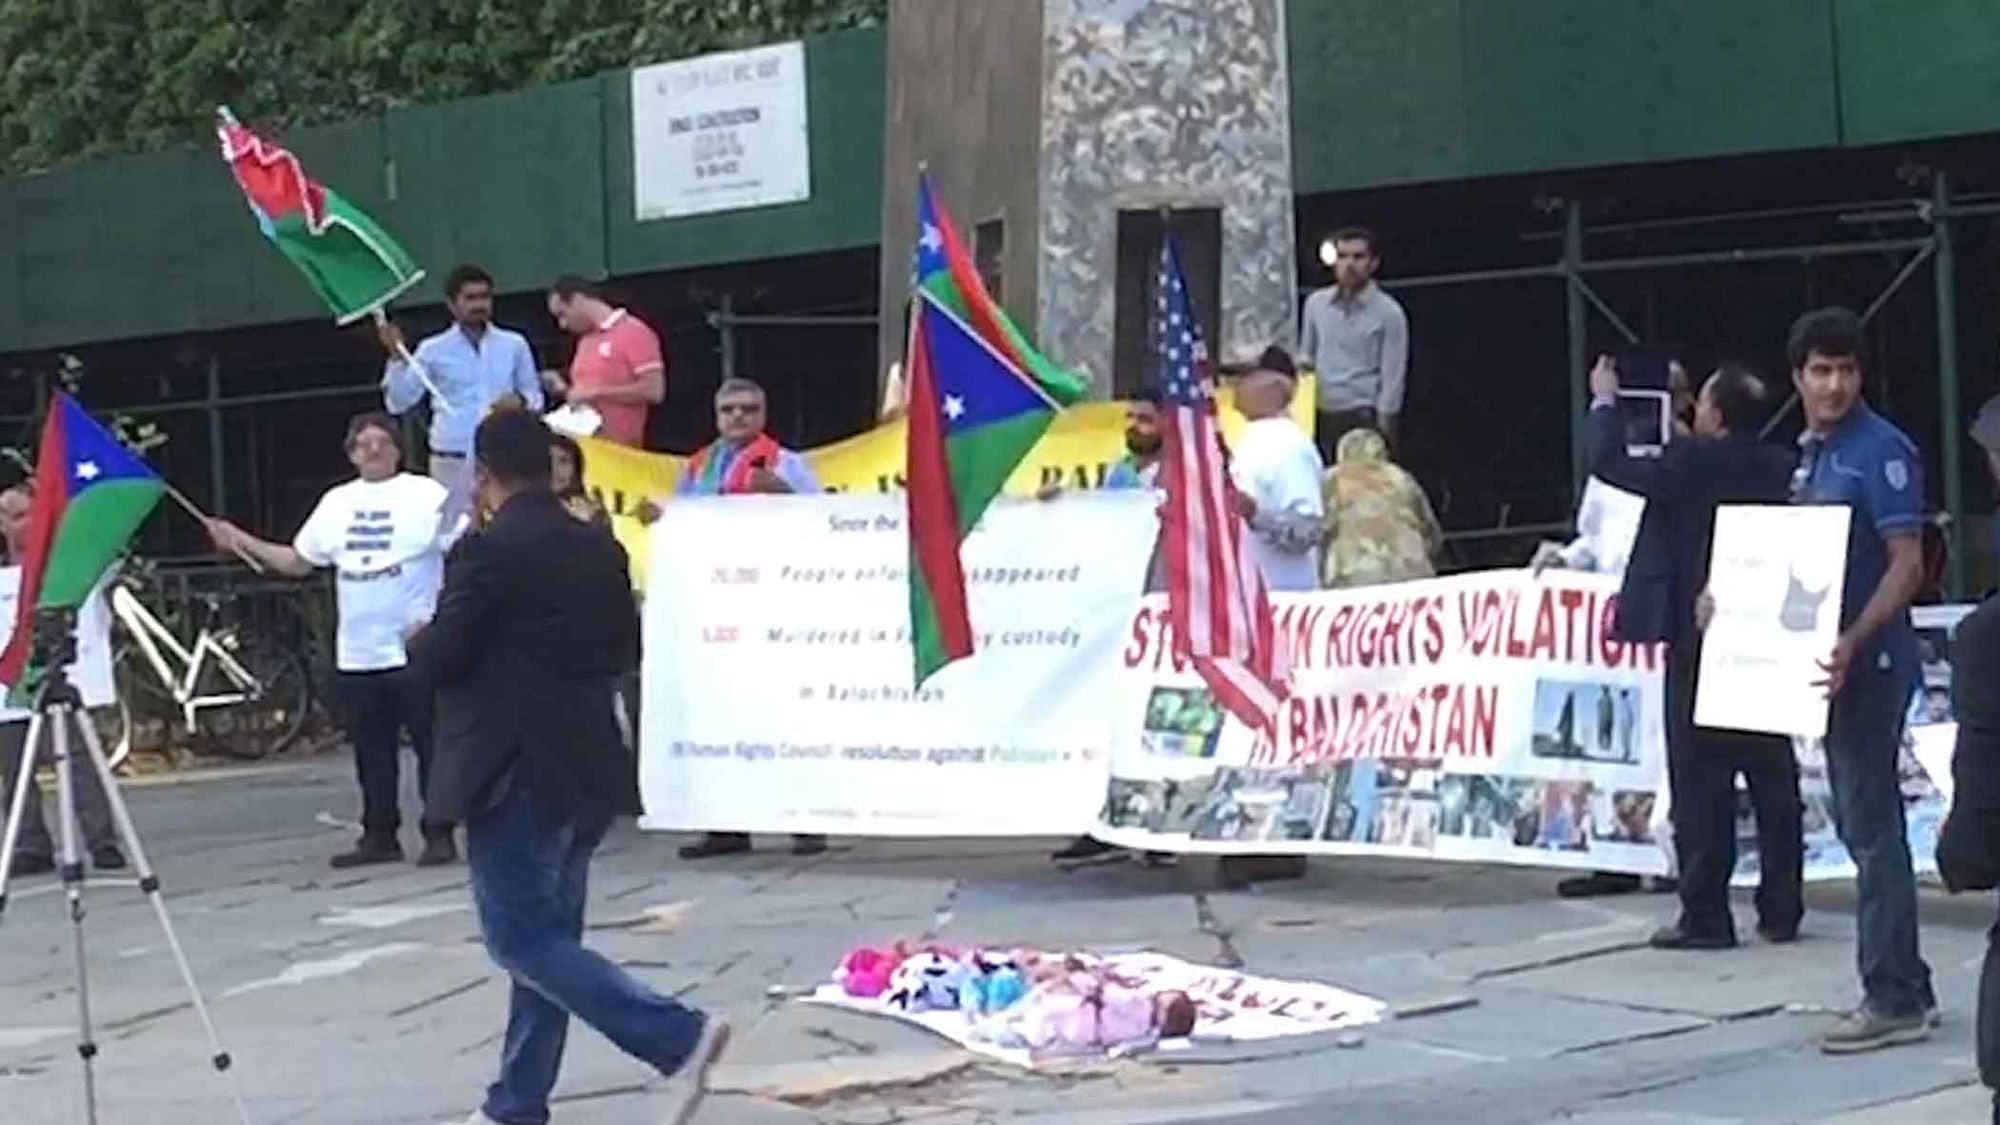 Baloch activists hold protests outside UN headquarters in New york. (Photo Courtesy: Vaishali Jain)